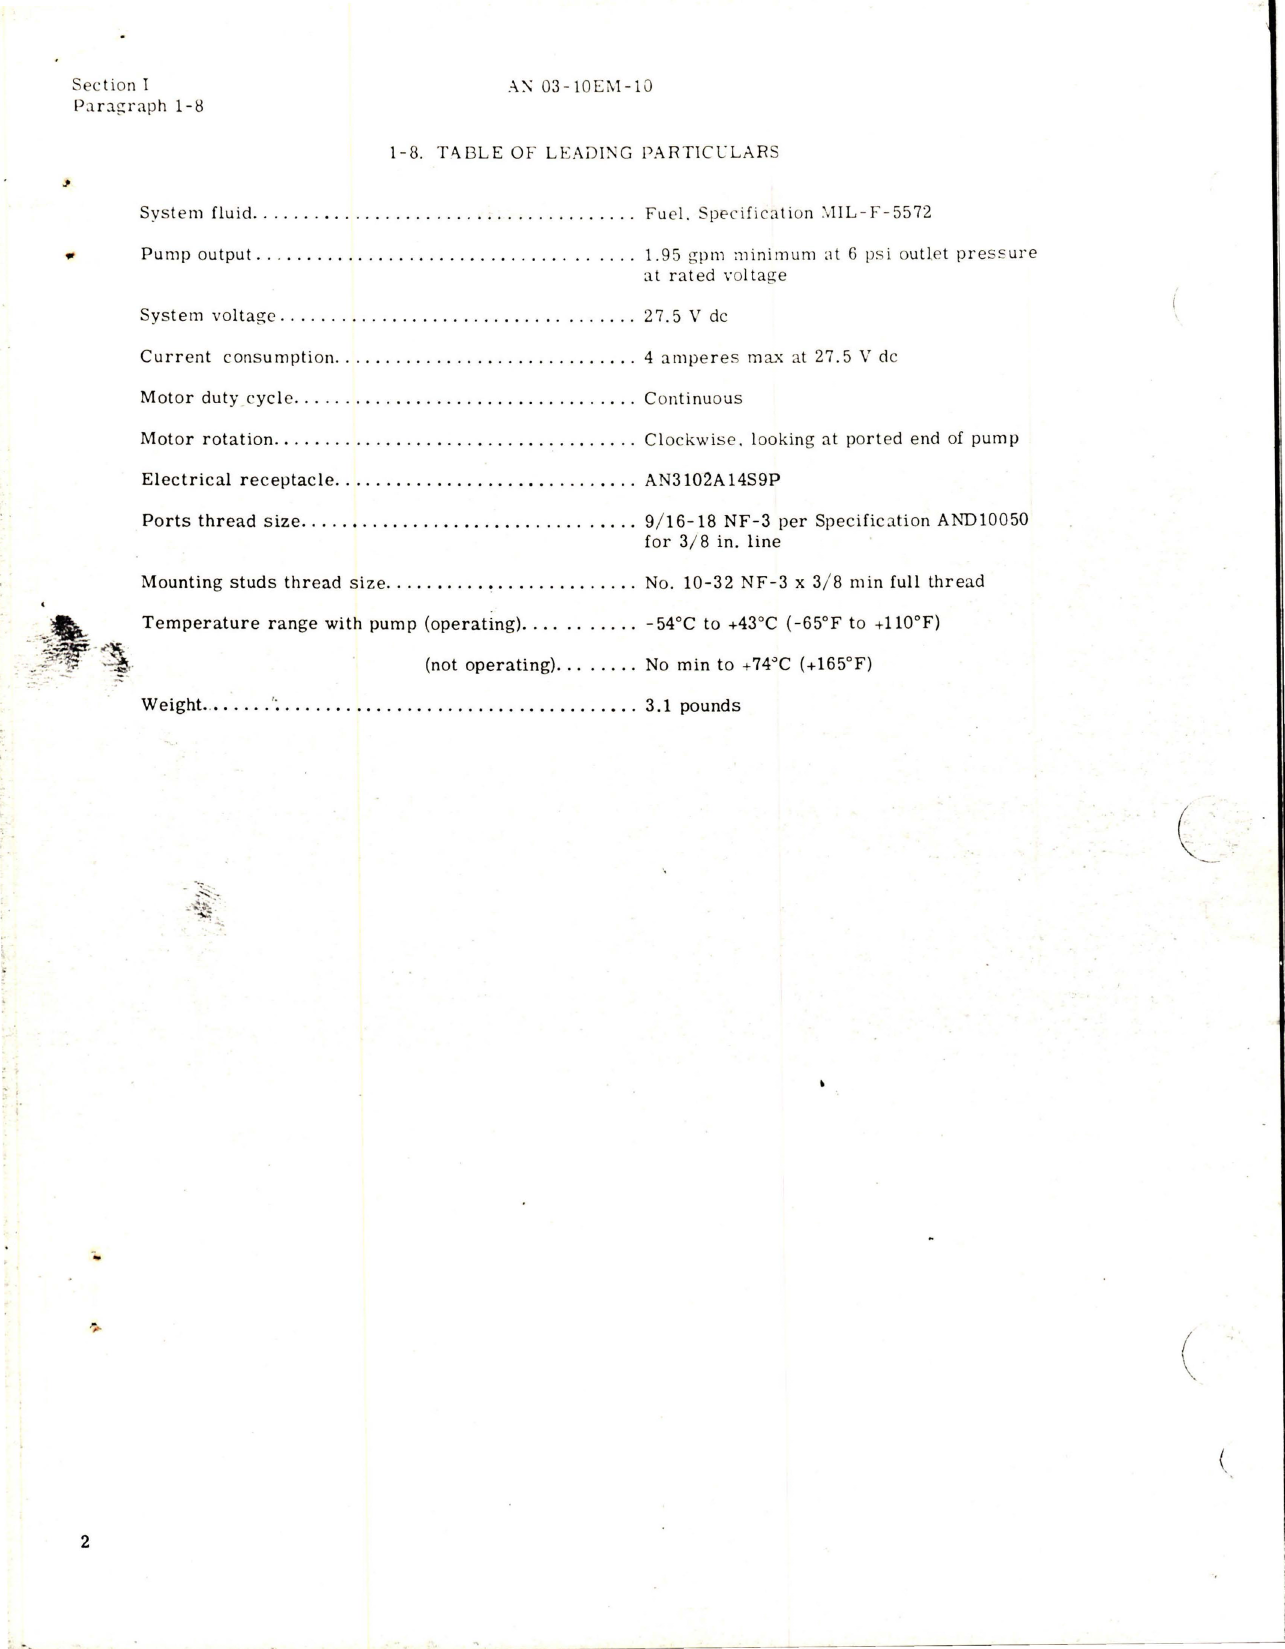 Sample page 7 from AirCorps Library document: Overhaul Instructions for Motor Driven Turbine Fuel Pump - Parts 22979, 22979-2, 28670, and 28670-2 